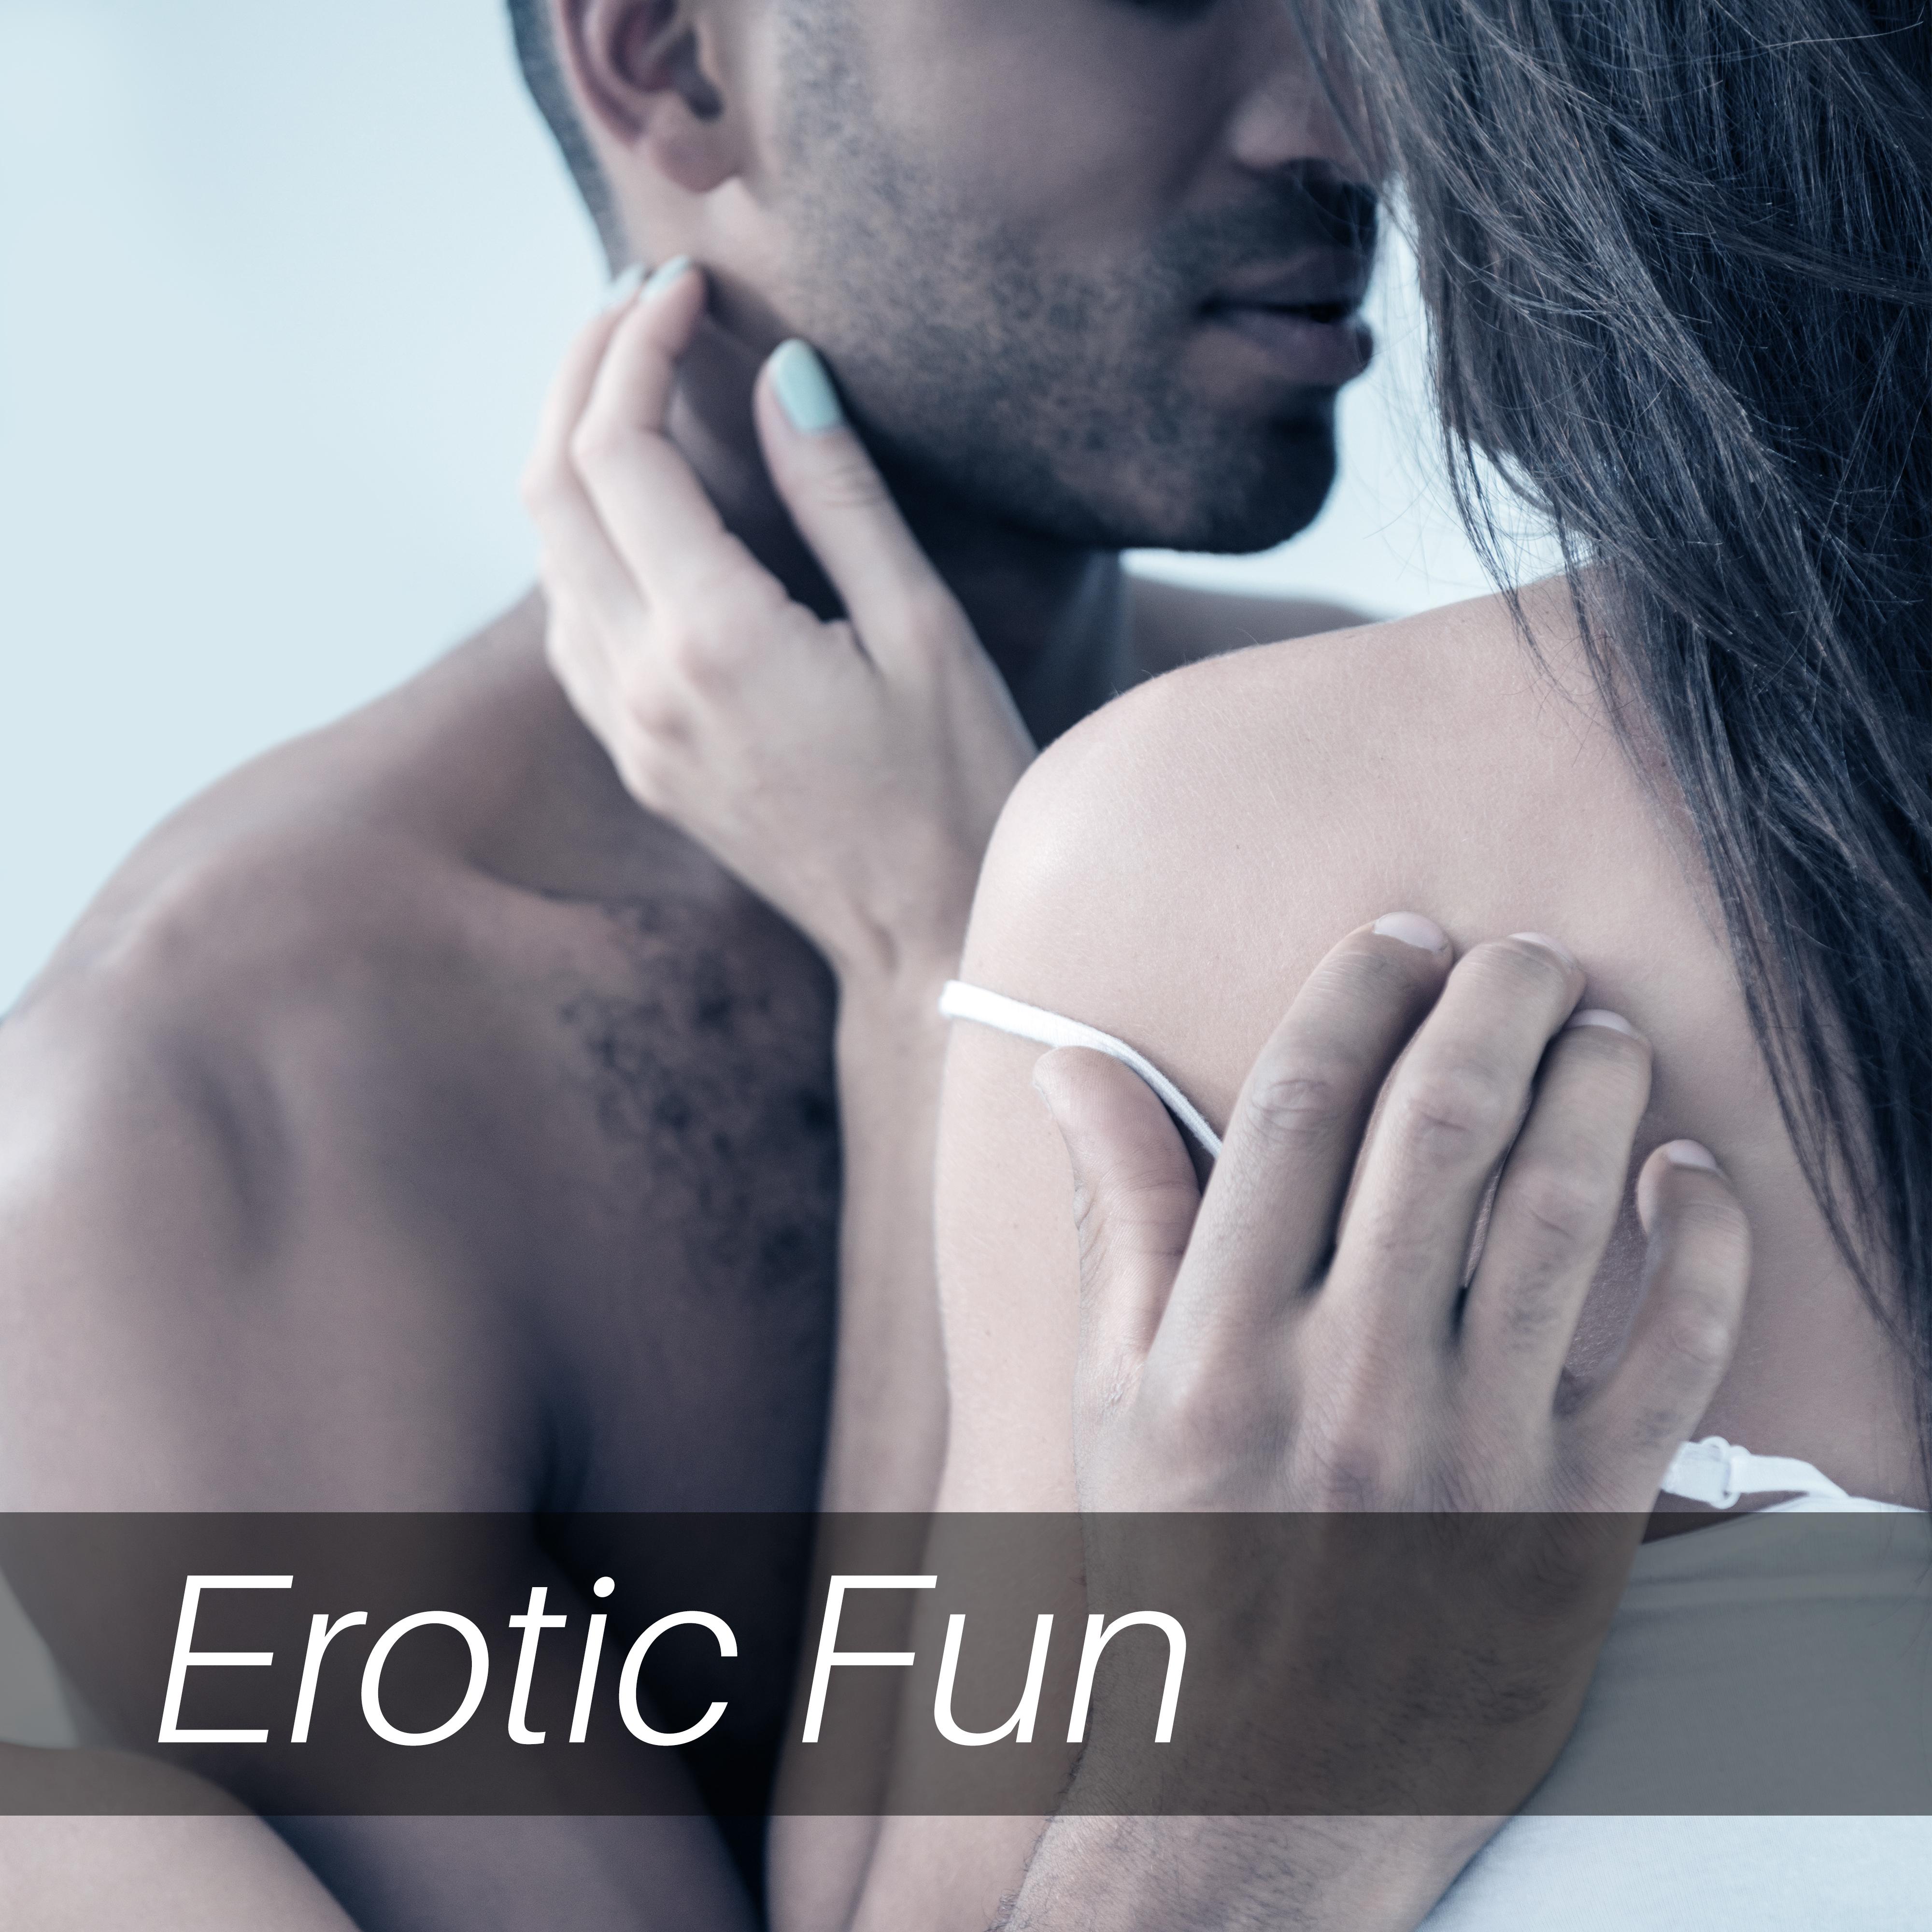 Erotic Fun – Sensual Chill Out Music, Bedroom Beats, *** Music, Tantric ***, Making Love, Relaxation for Two, Kamasutra Chill